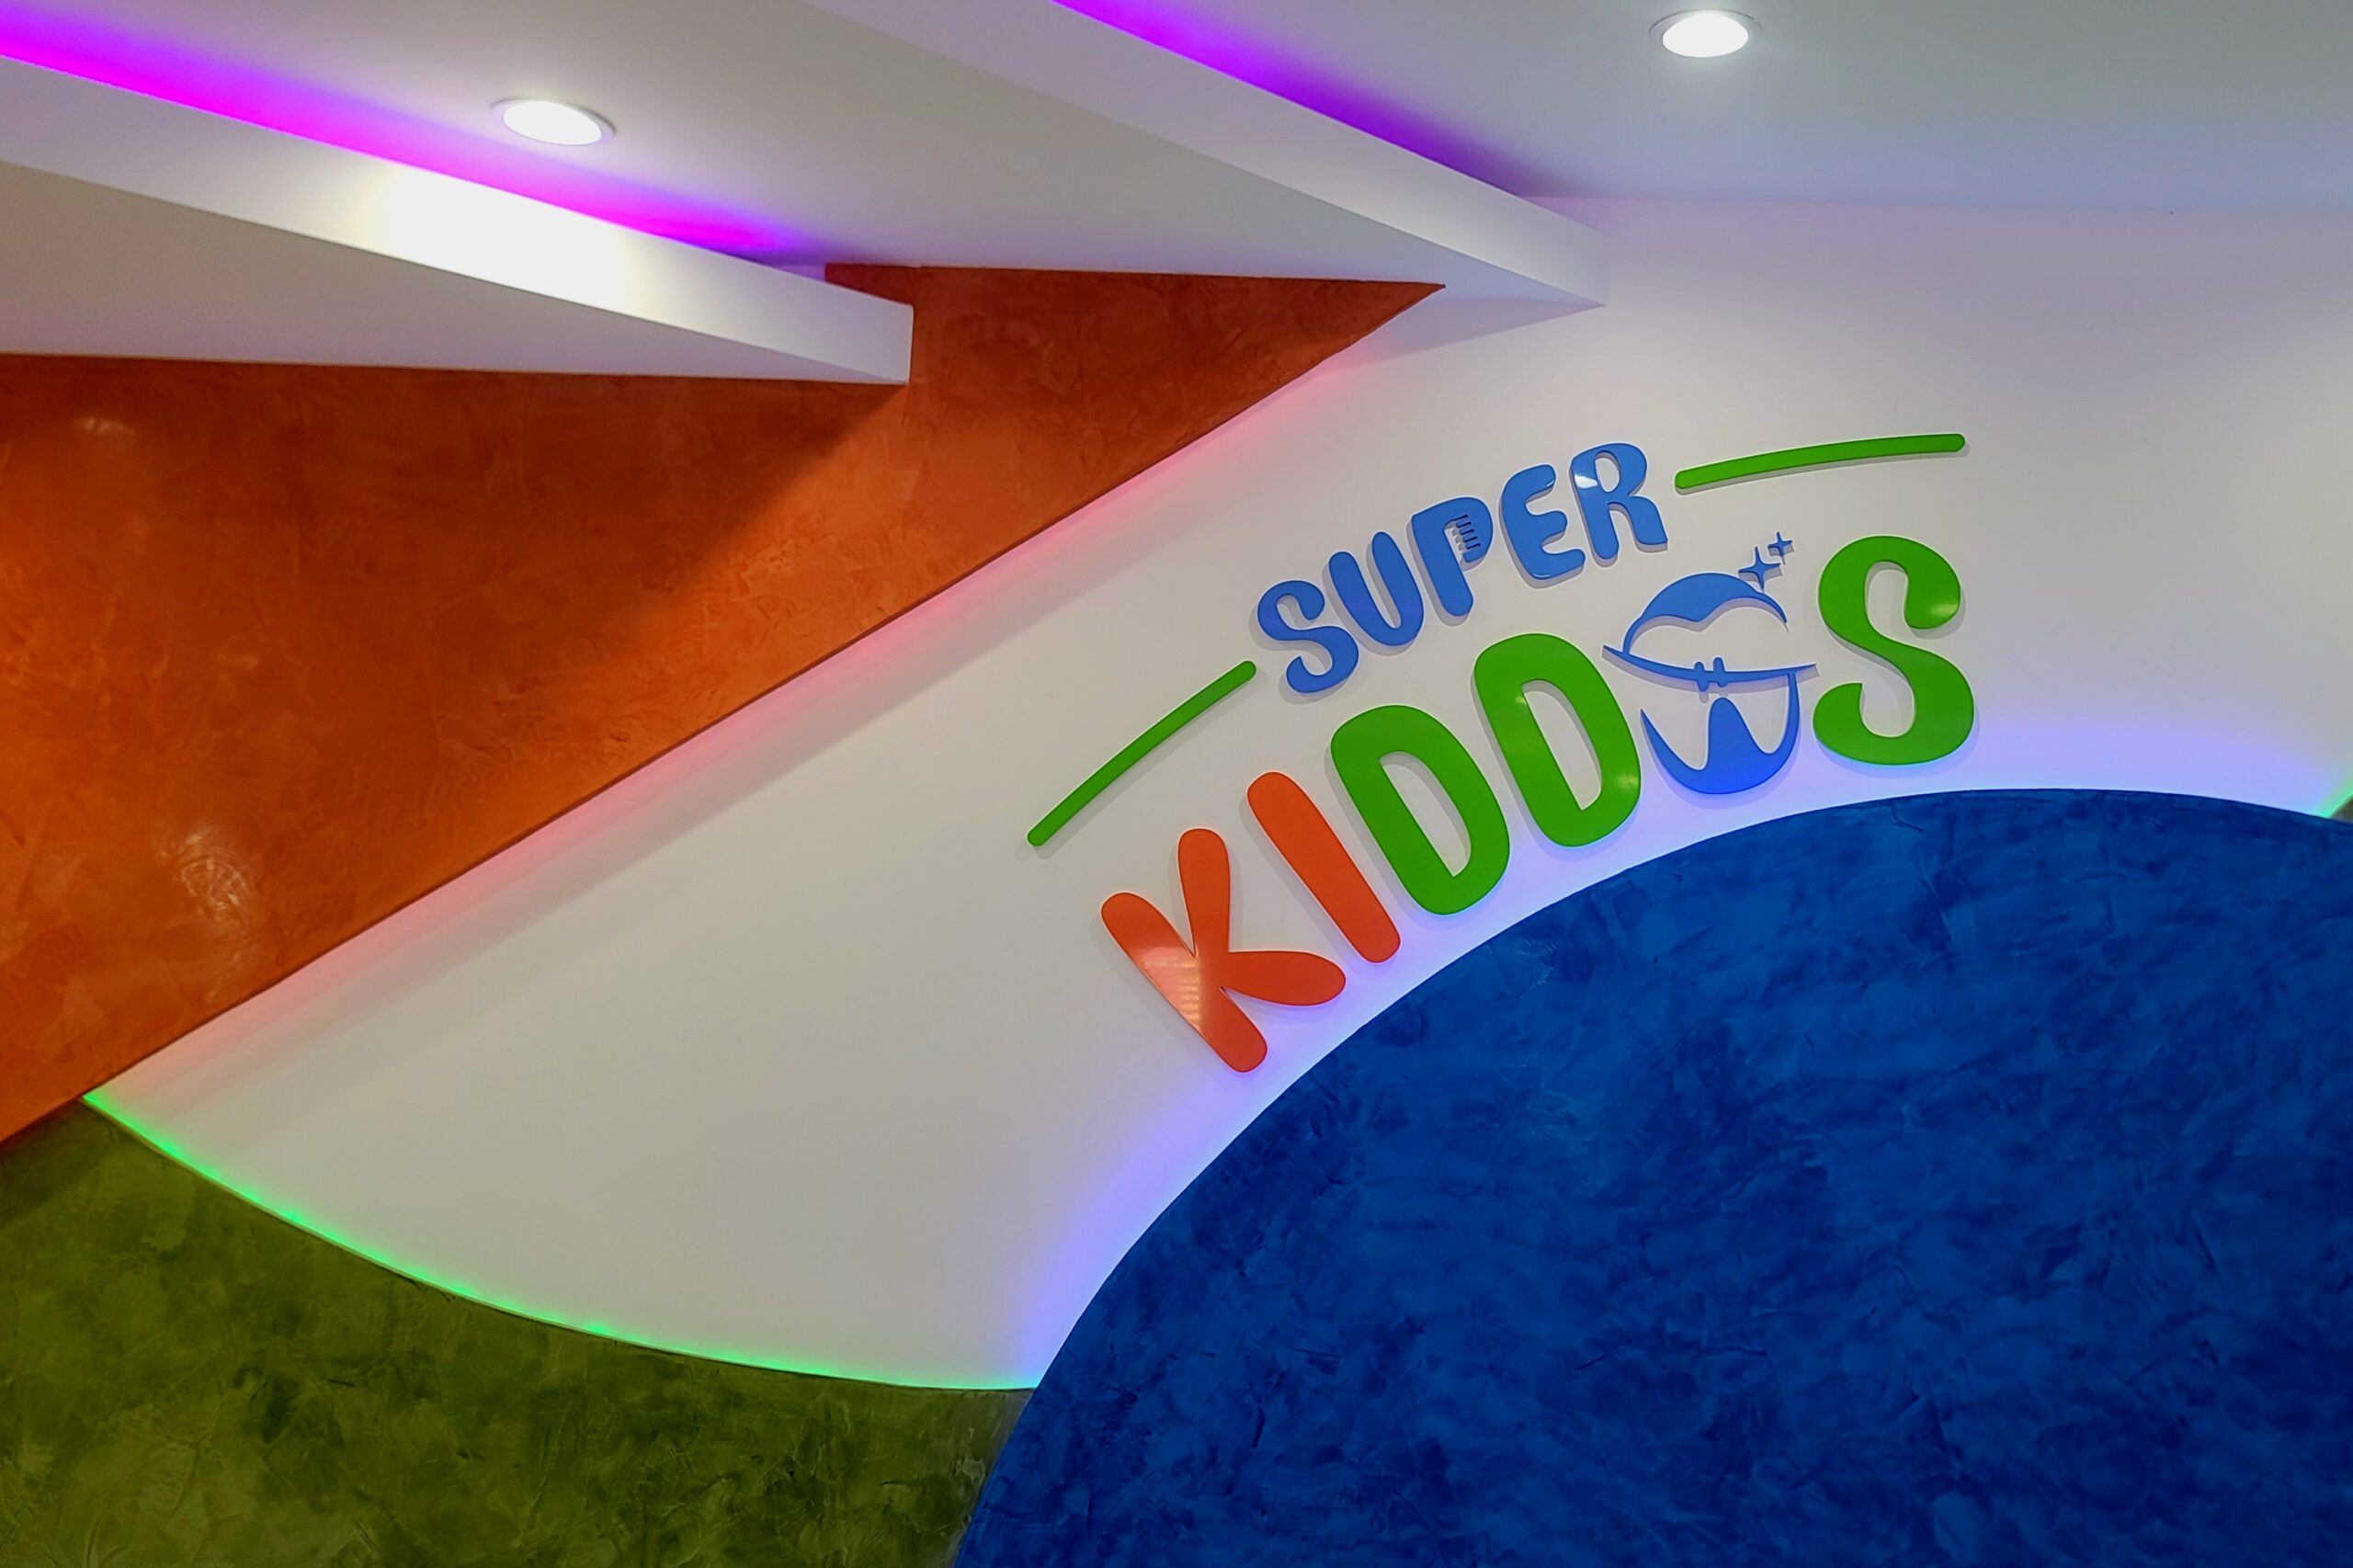 Indoor kids play area bright wall shapes, which complement the signage on a light background